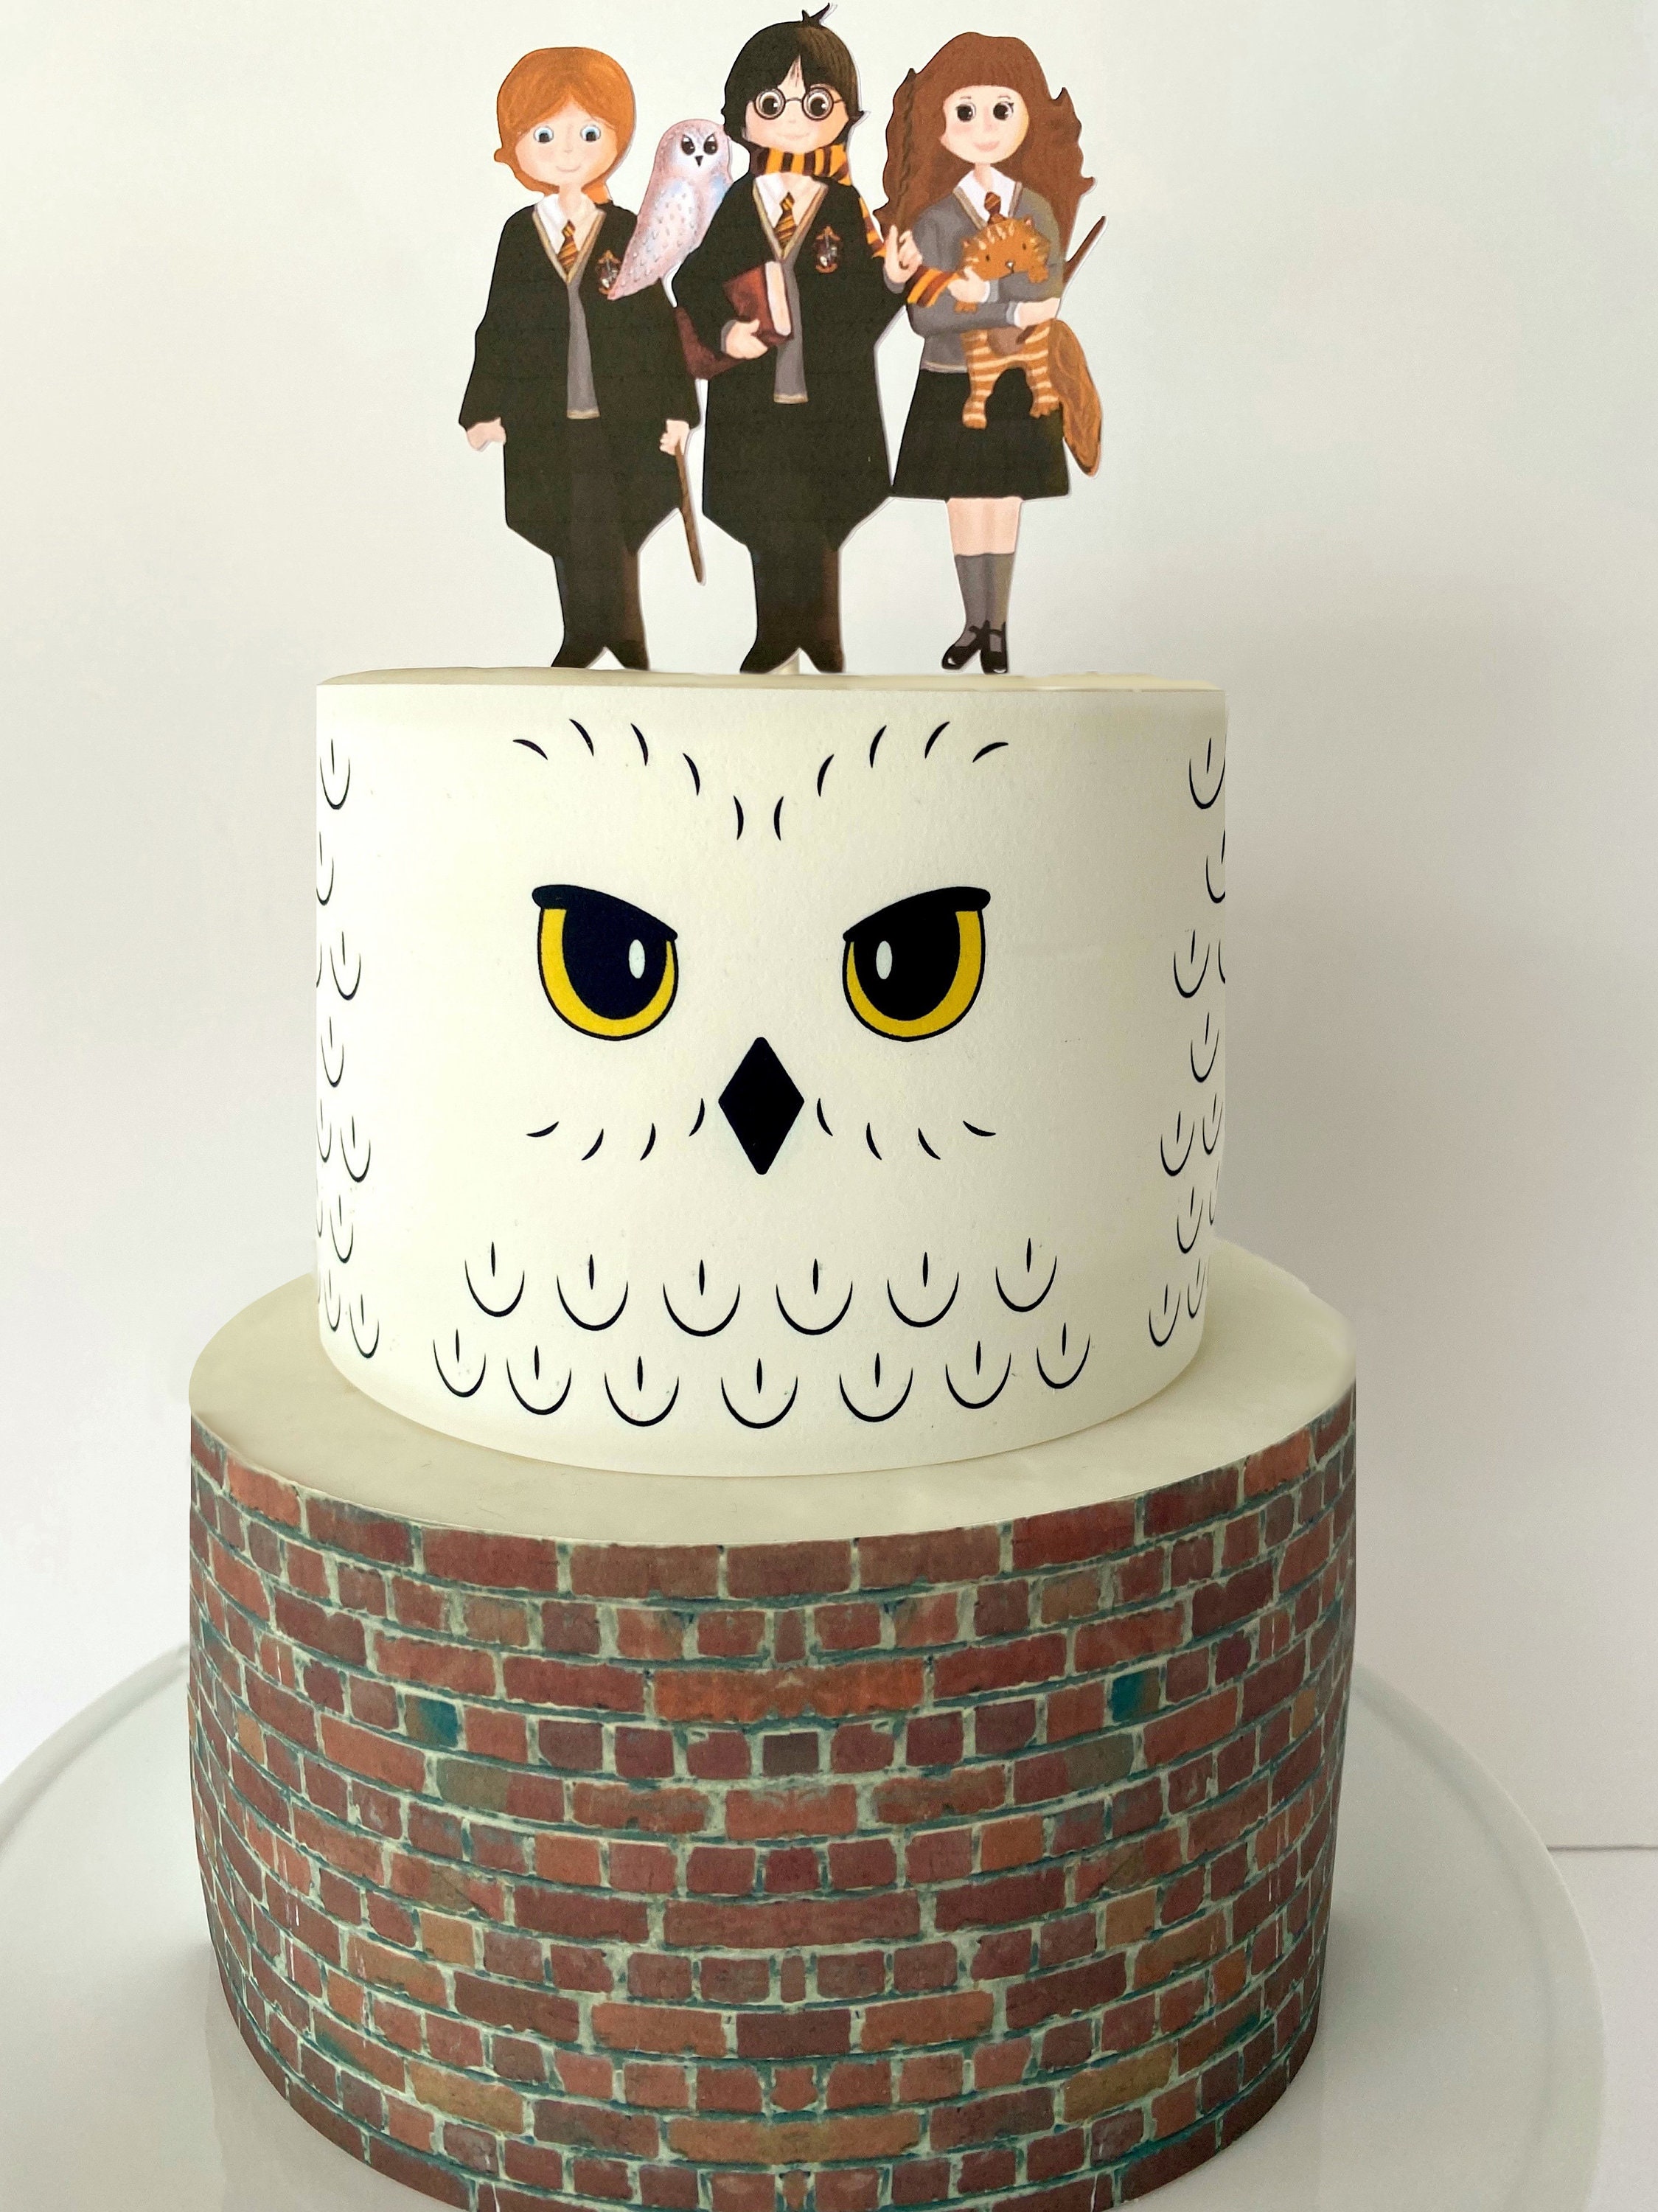 Harry Potter and The Prisoner of Azkarban Edible Cake Topper Image ABPID08465